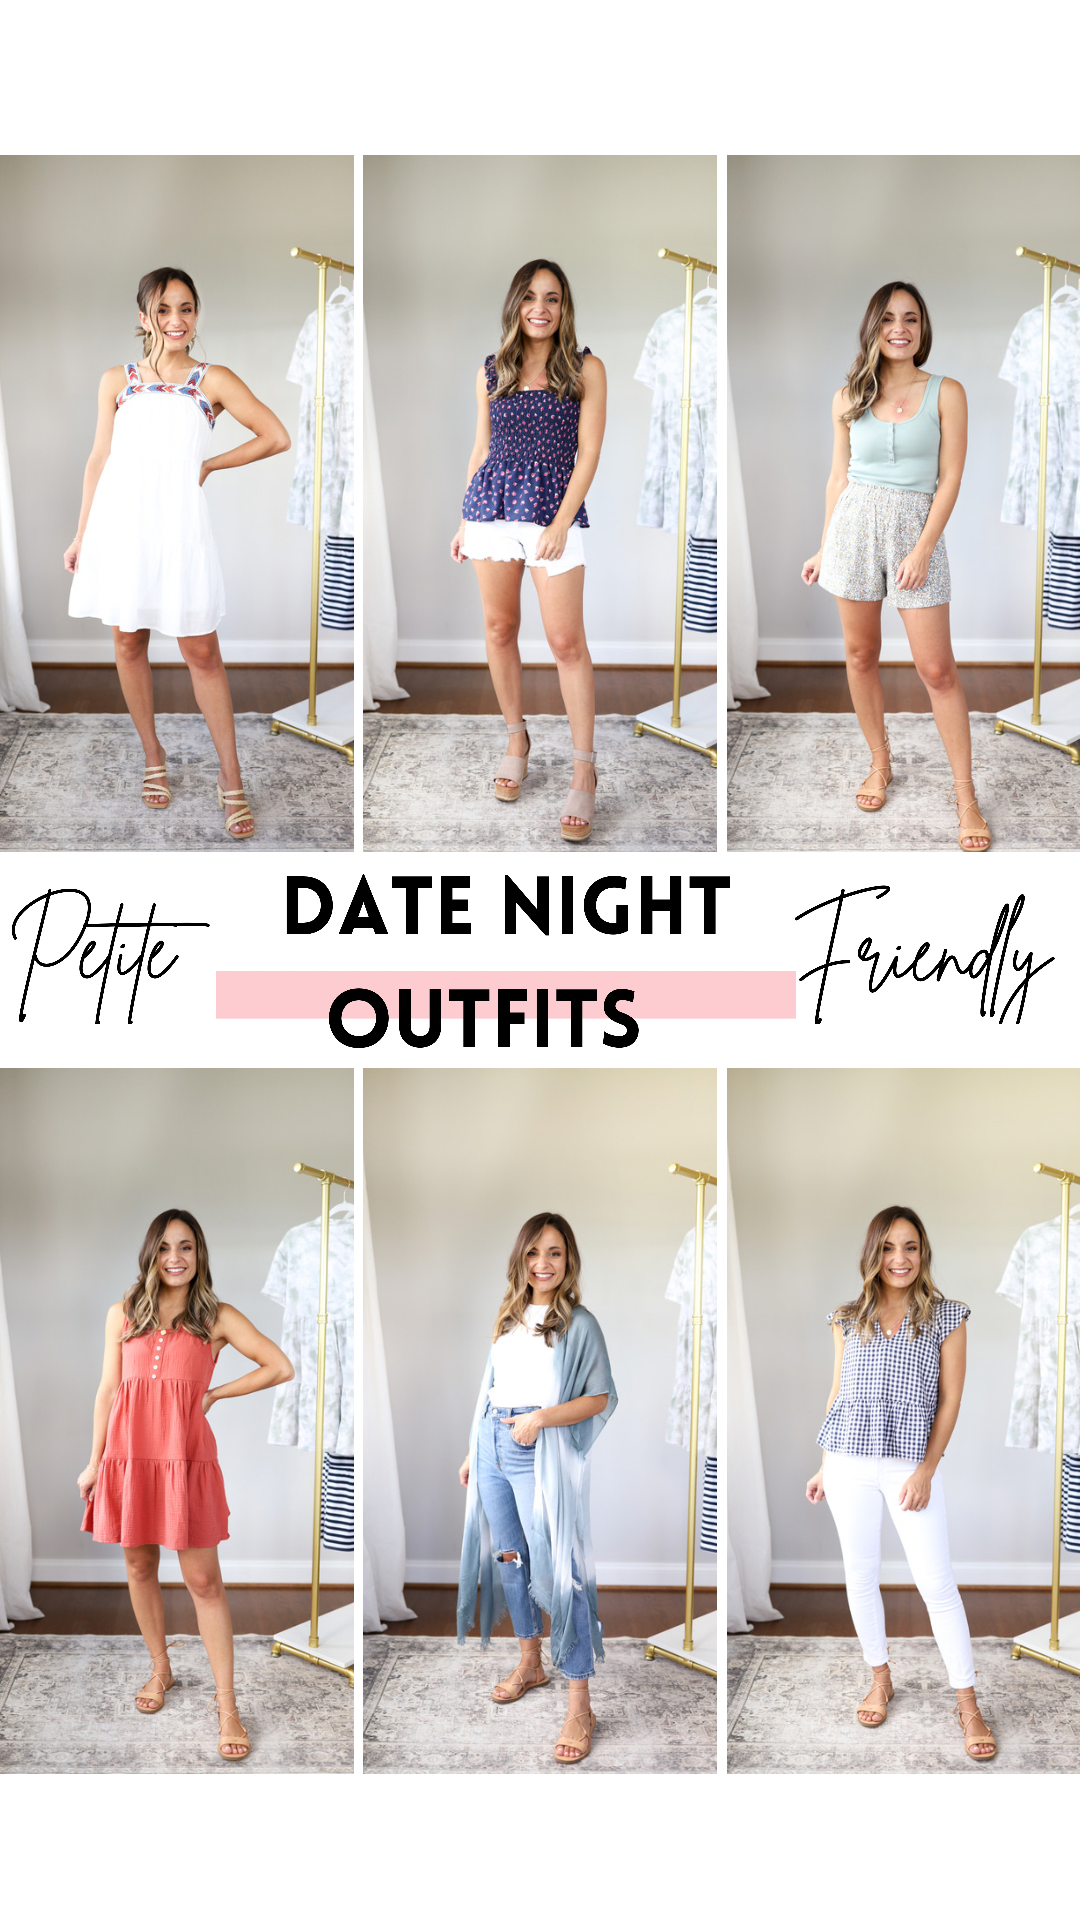 CASUAL DATE NIGHT OUTFITS, 5 DATE OUTFIT IDEAS + LOOKBOOK